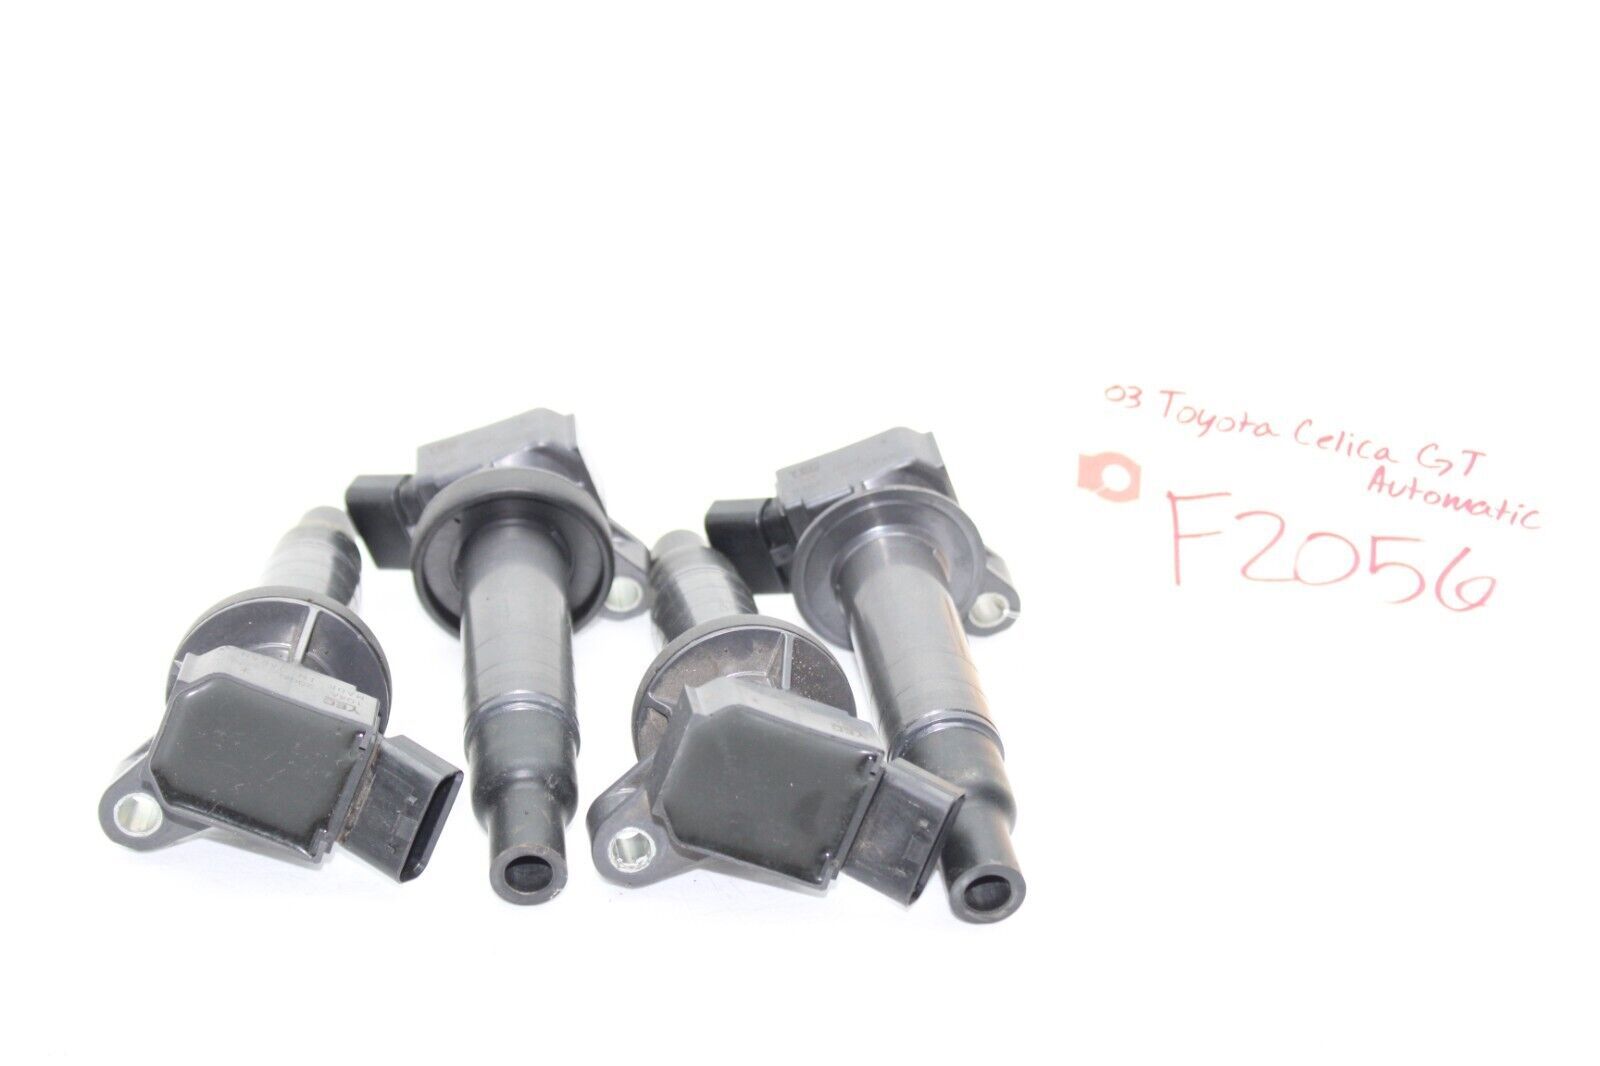 Primary image for 00-05 TOYOTA CELICA GT AUTOMATIC Ignition Coils X4 F2056